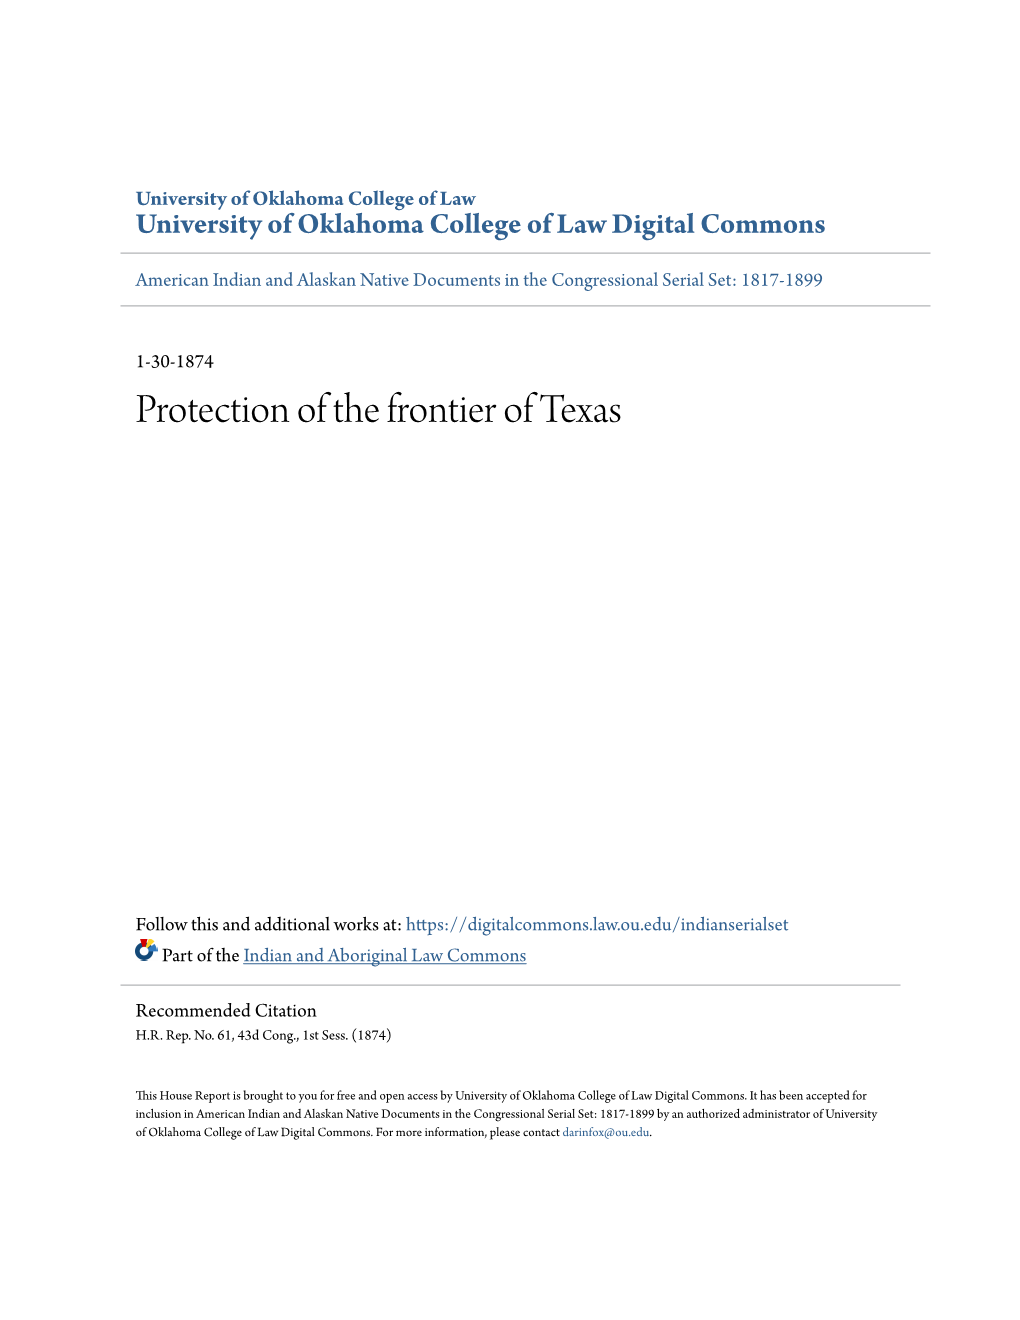 Protection of the Frontier of Texas